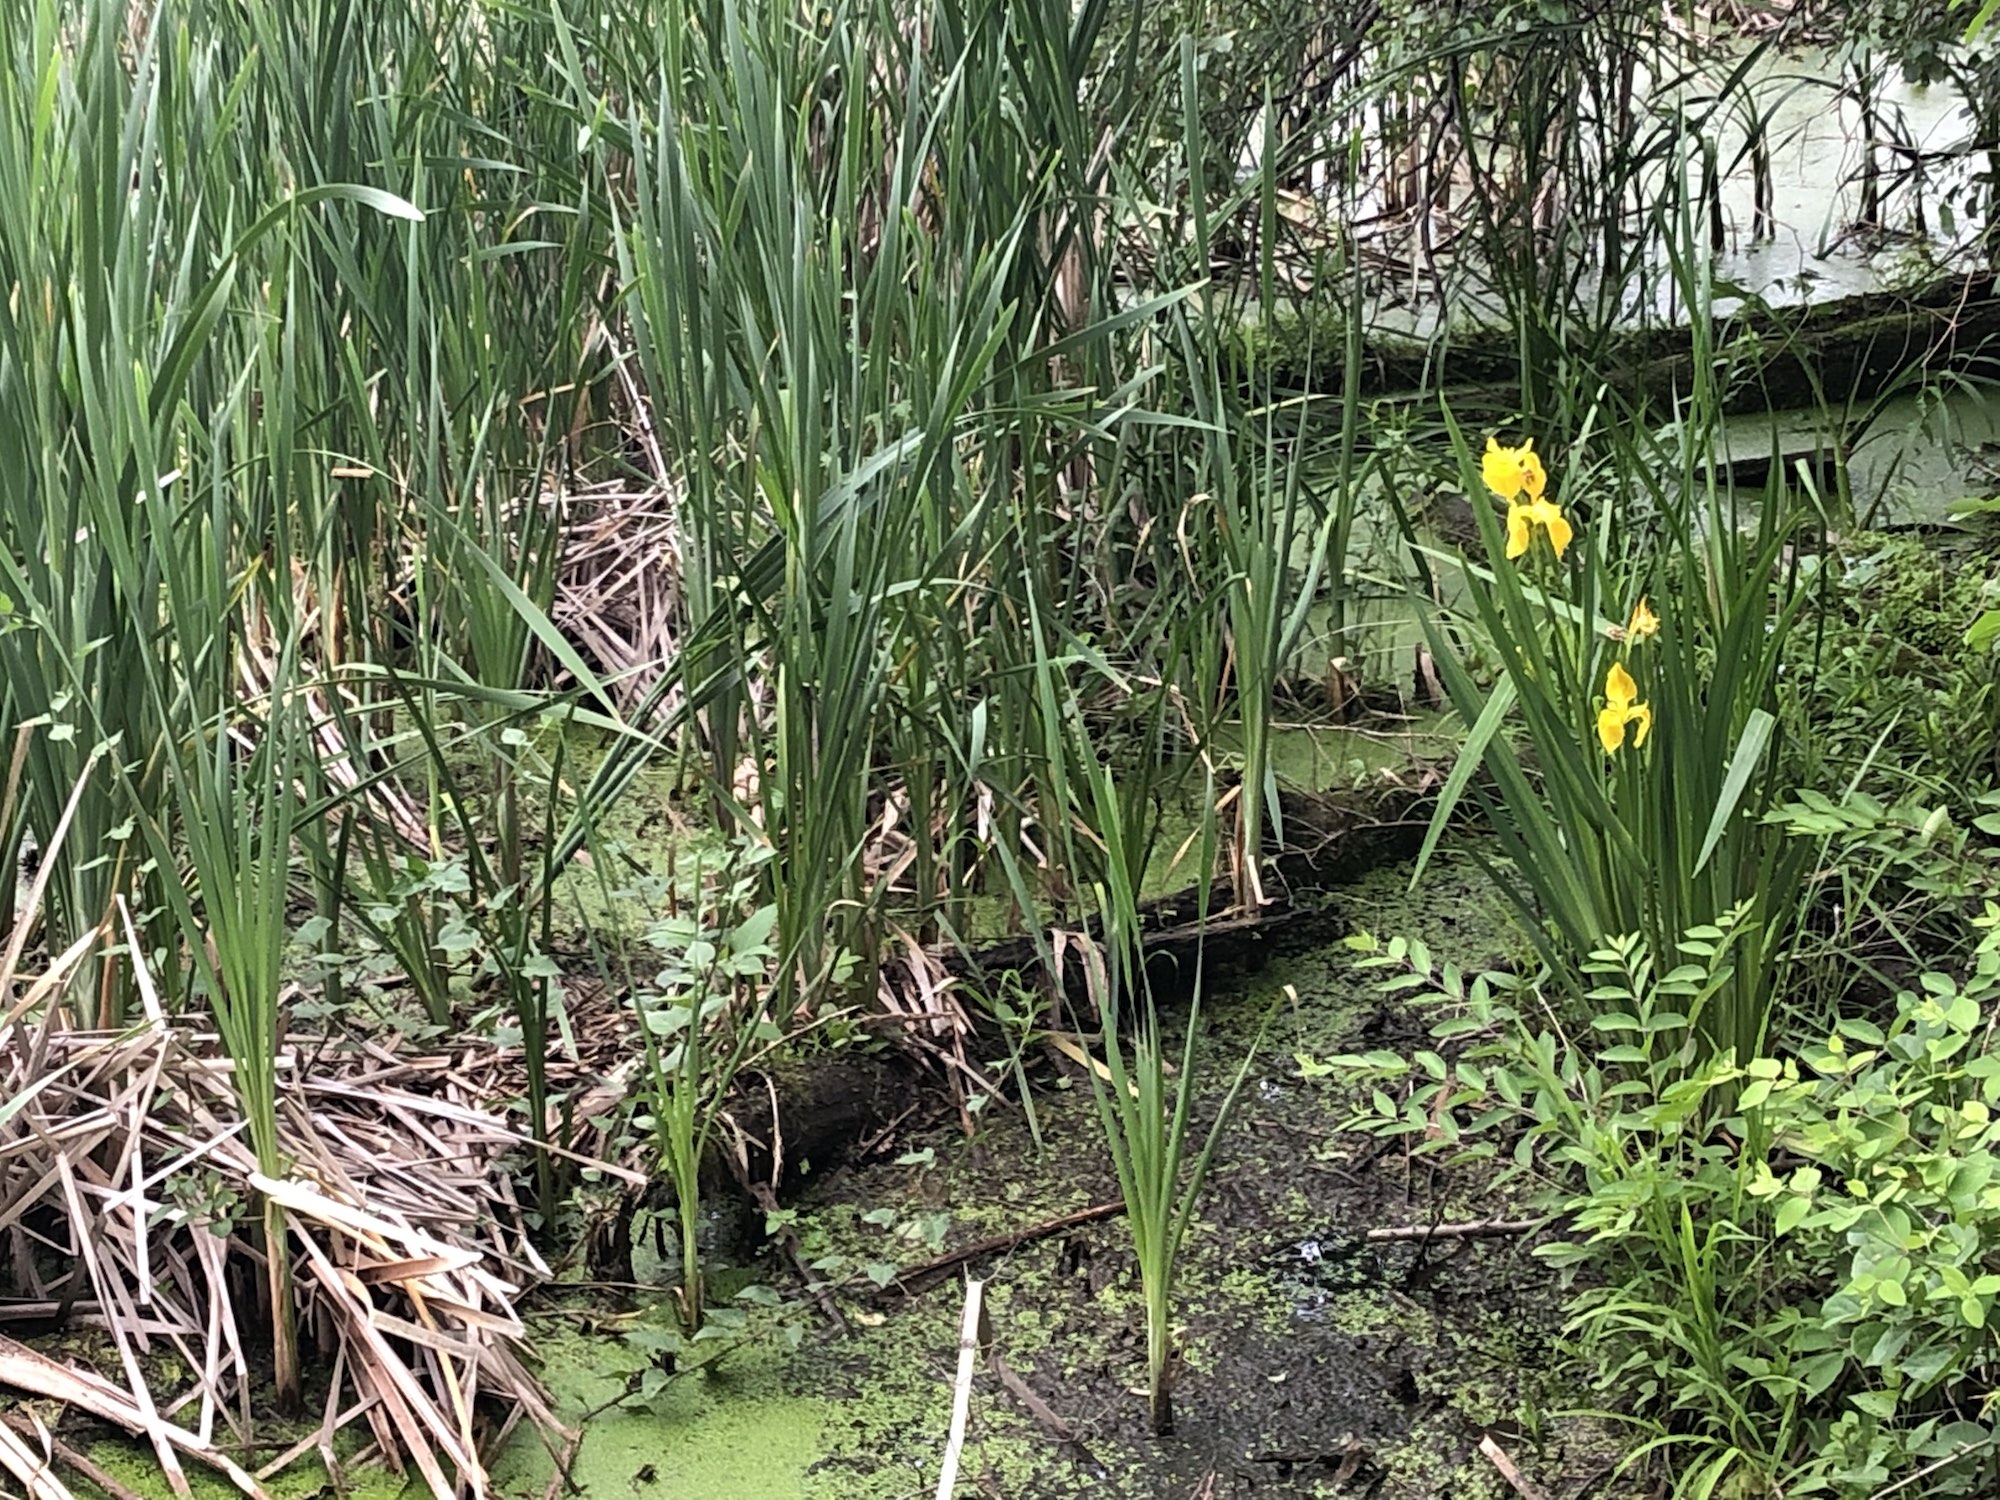 Yellow Flag Iris by Cattails on Lake Wingra on June 17, 2019.